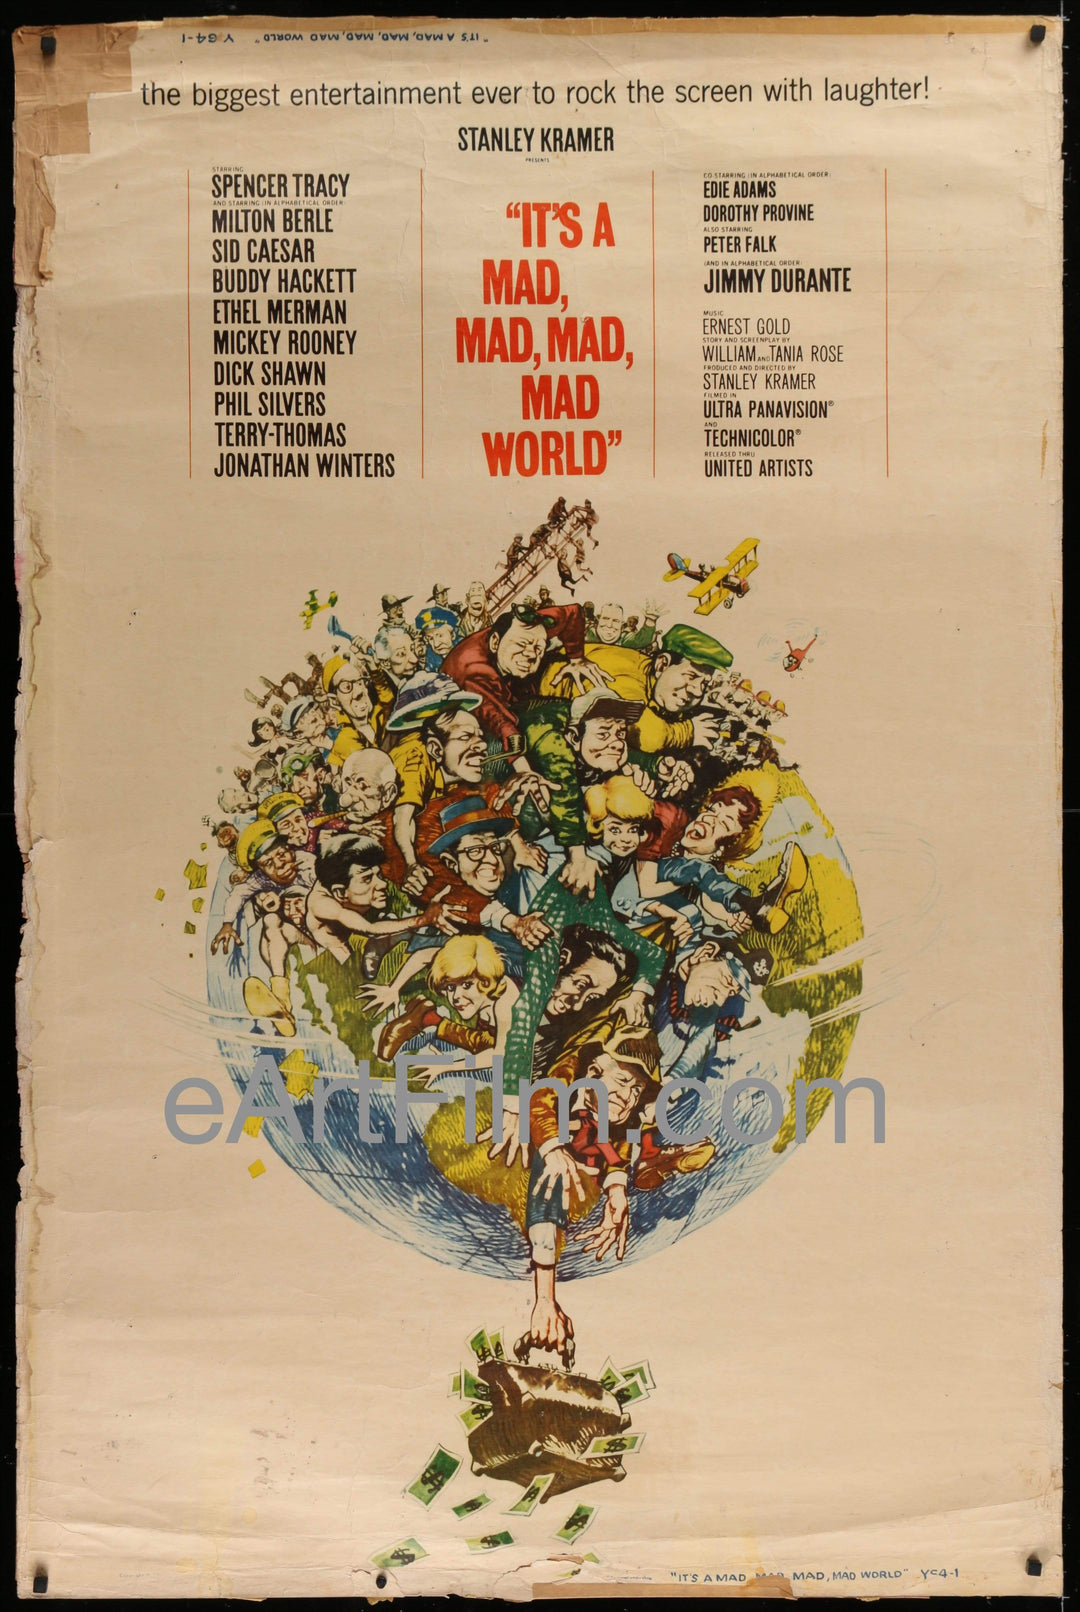 eArtFilm.com U.S Style Y 40"x60" poster It's A Mad, Mad, Mad, Mad World vintage movie poster 1964 40x60 Style Y